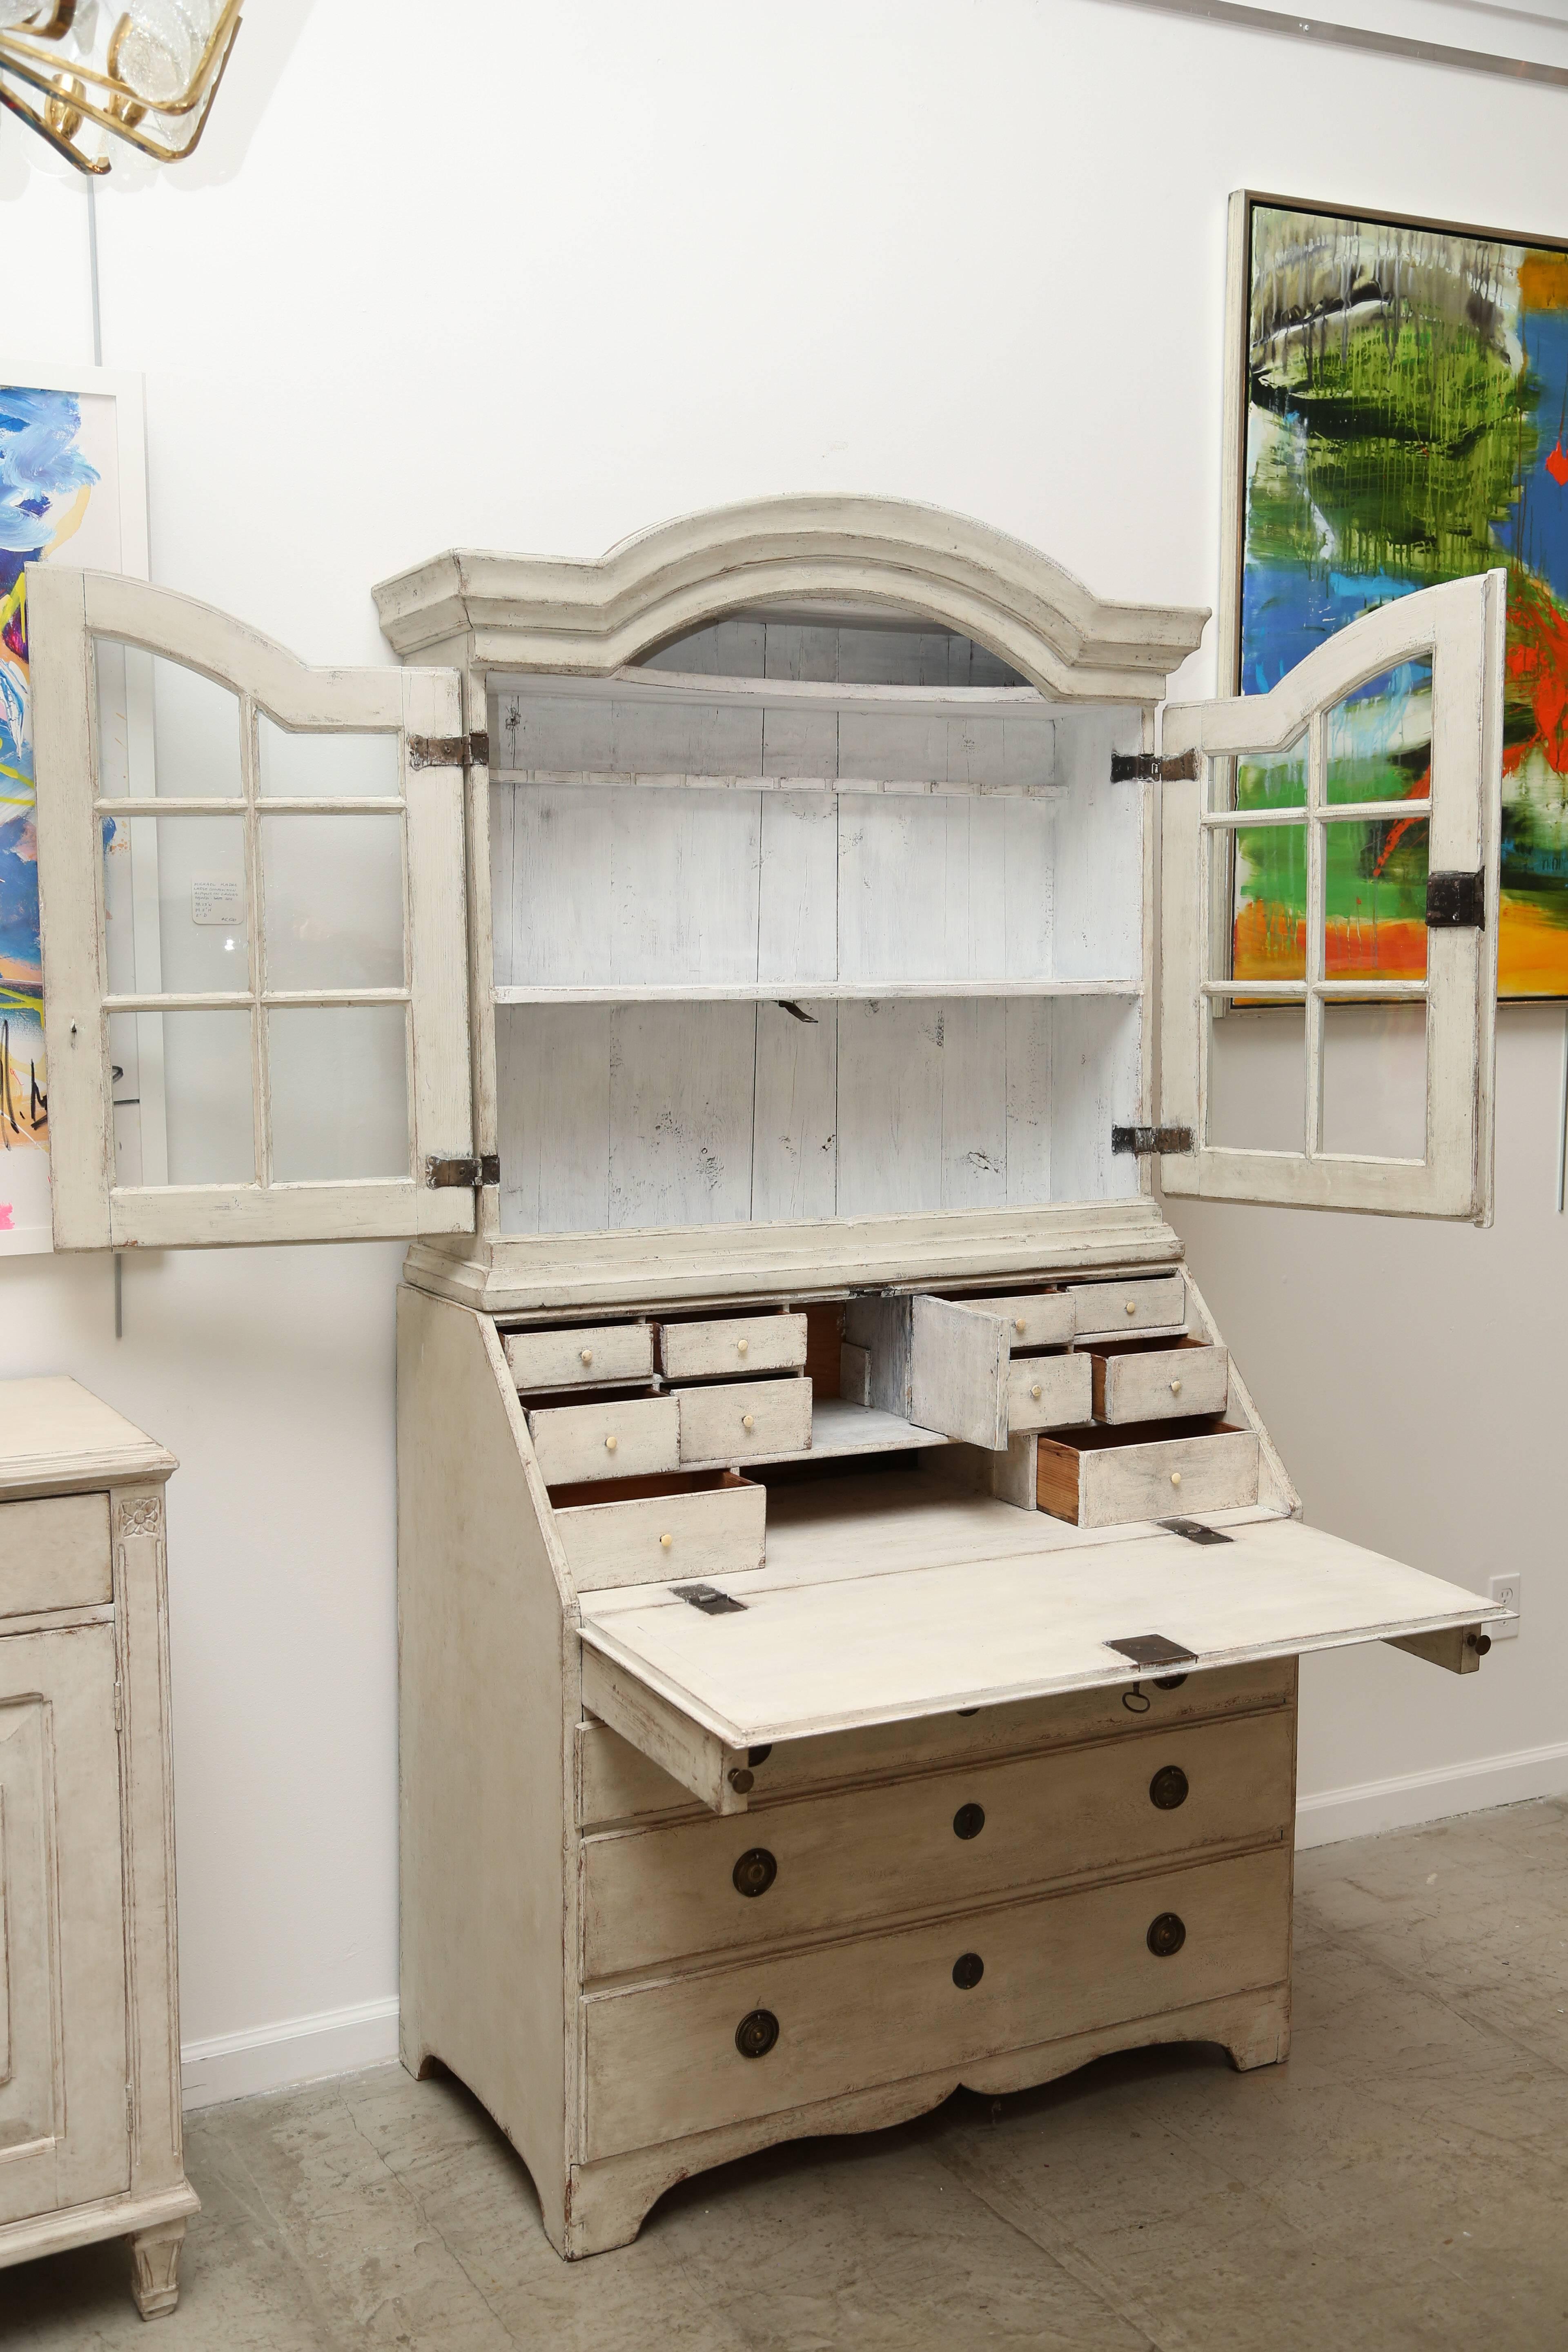 Antique Swedish Baroque Secretary with glass doors, painted Swedish distressed white/cream color. Upper section has curved arched doors with original glass panels, two shelves for books or display, a spoon rack and shallow top curved shelf for small